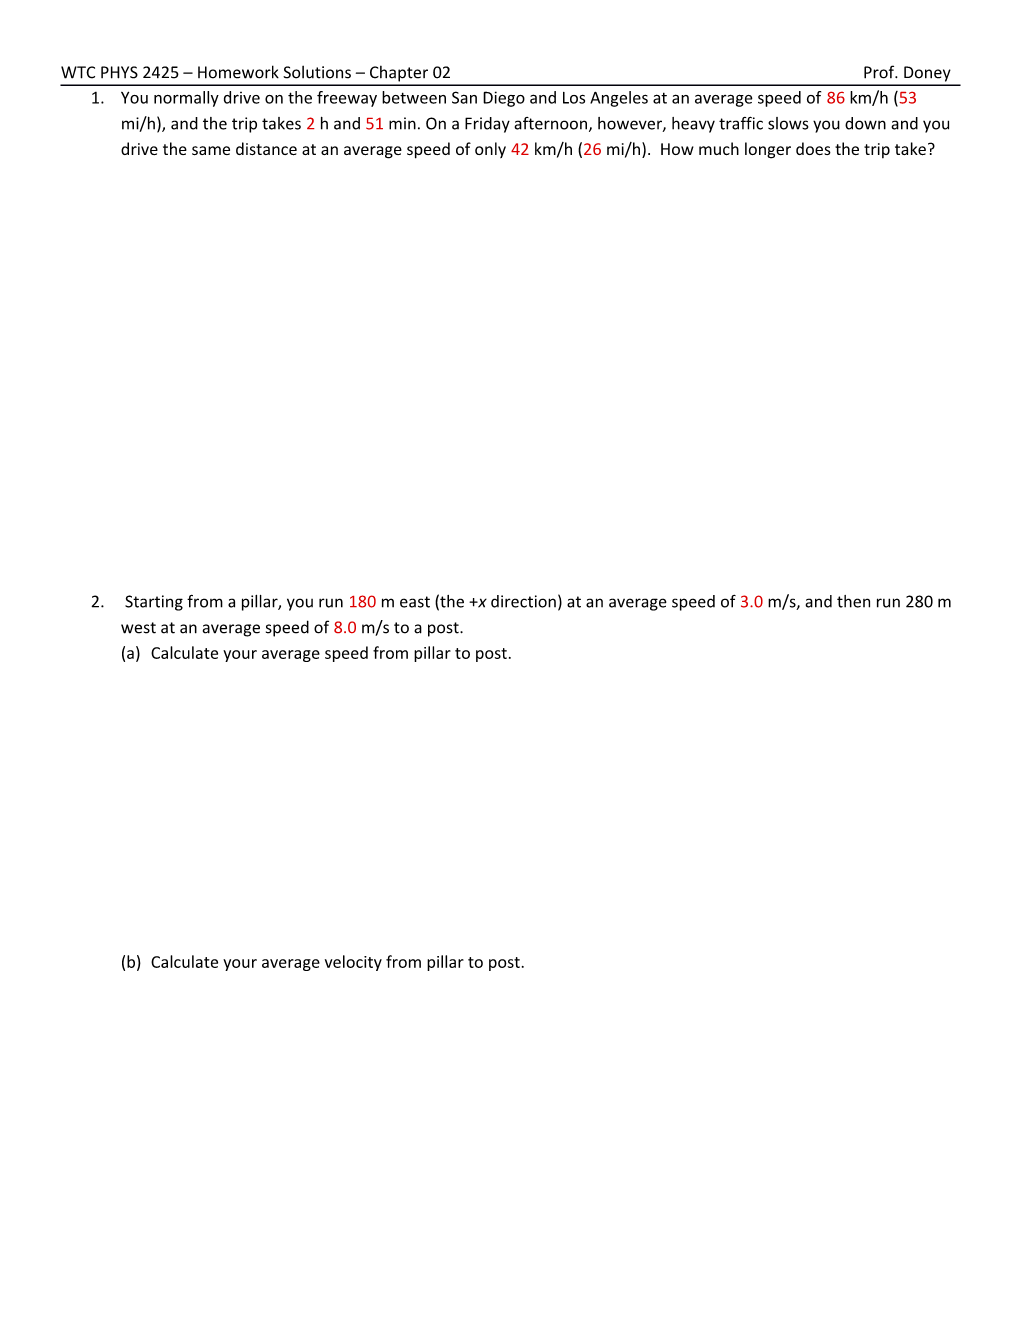 WTC PHYS 2425 Homework Solutions Chapter 02 Prof. Doney